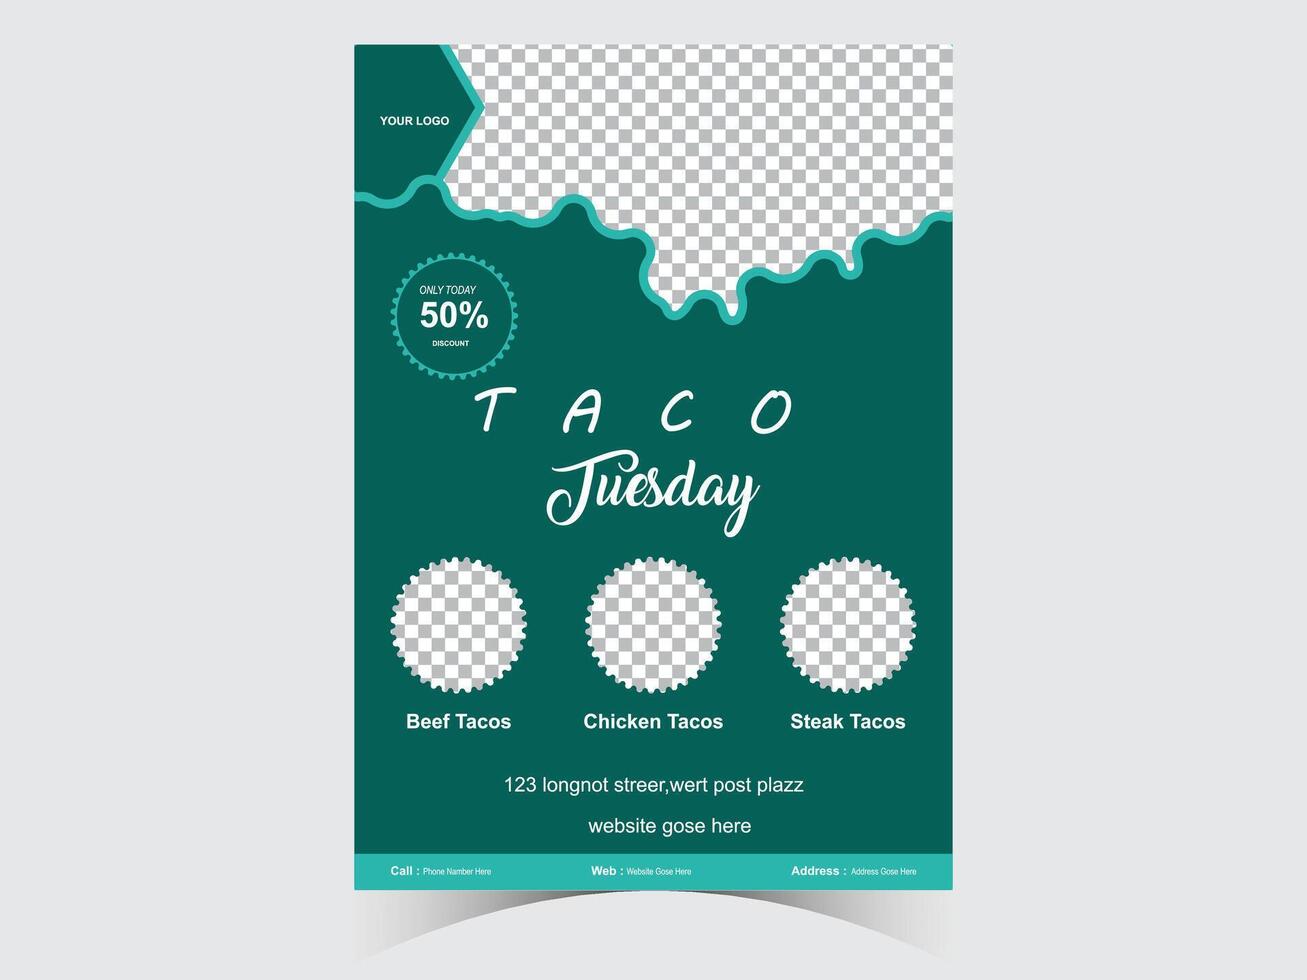 Tacos hot spicy Spanish restaurant menu or fast food restaurant food menu or modern food flyer vector template with a creative layout which can be used for sell offers or food promotion.